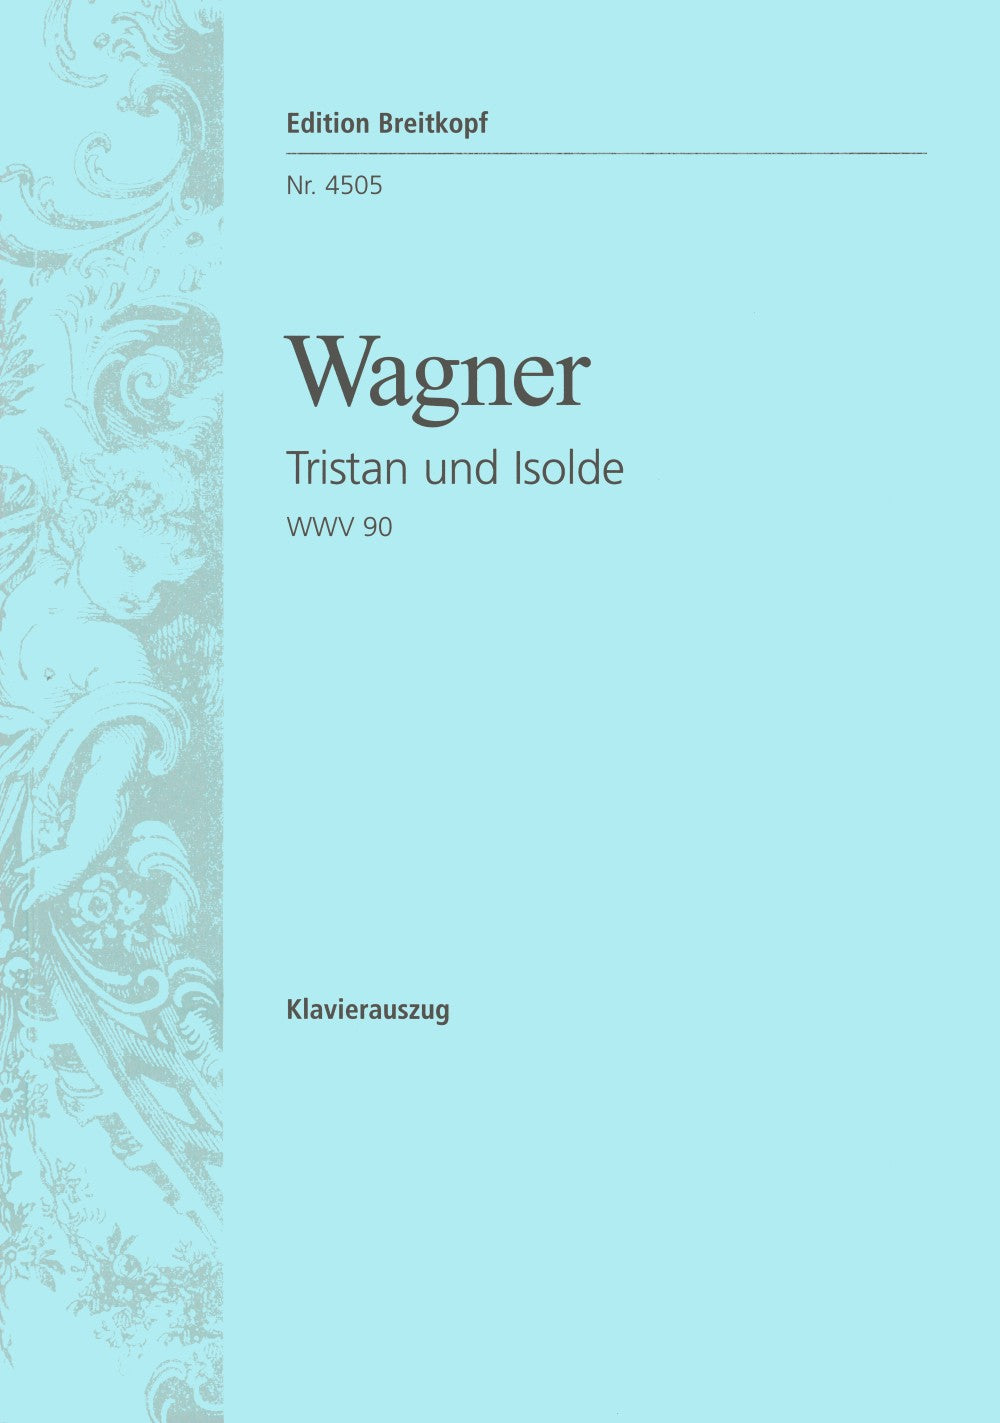 Wagner Tristan and Isolde WWV 90